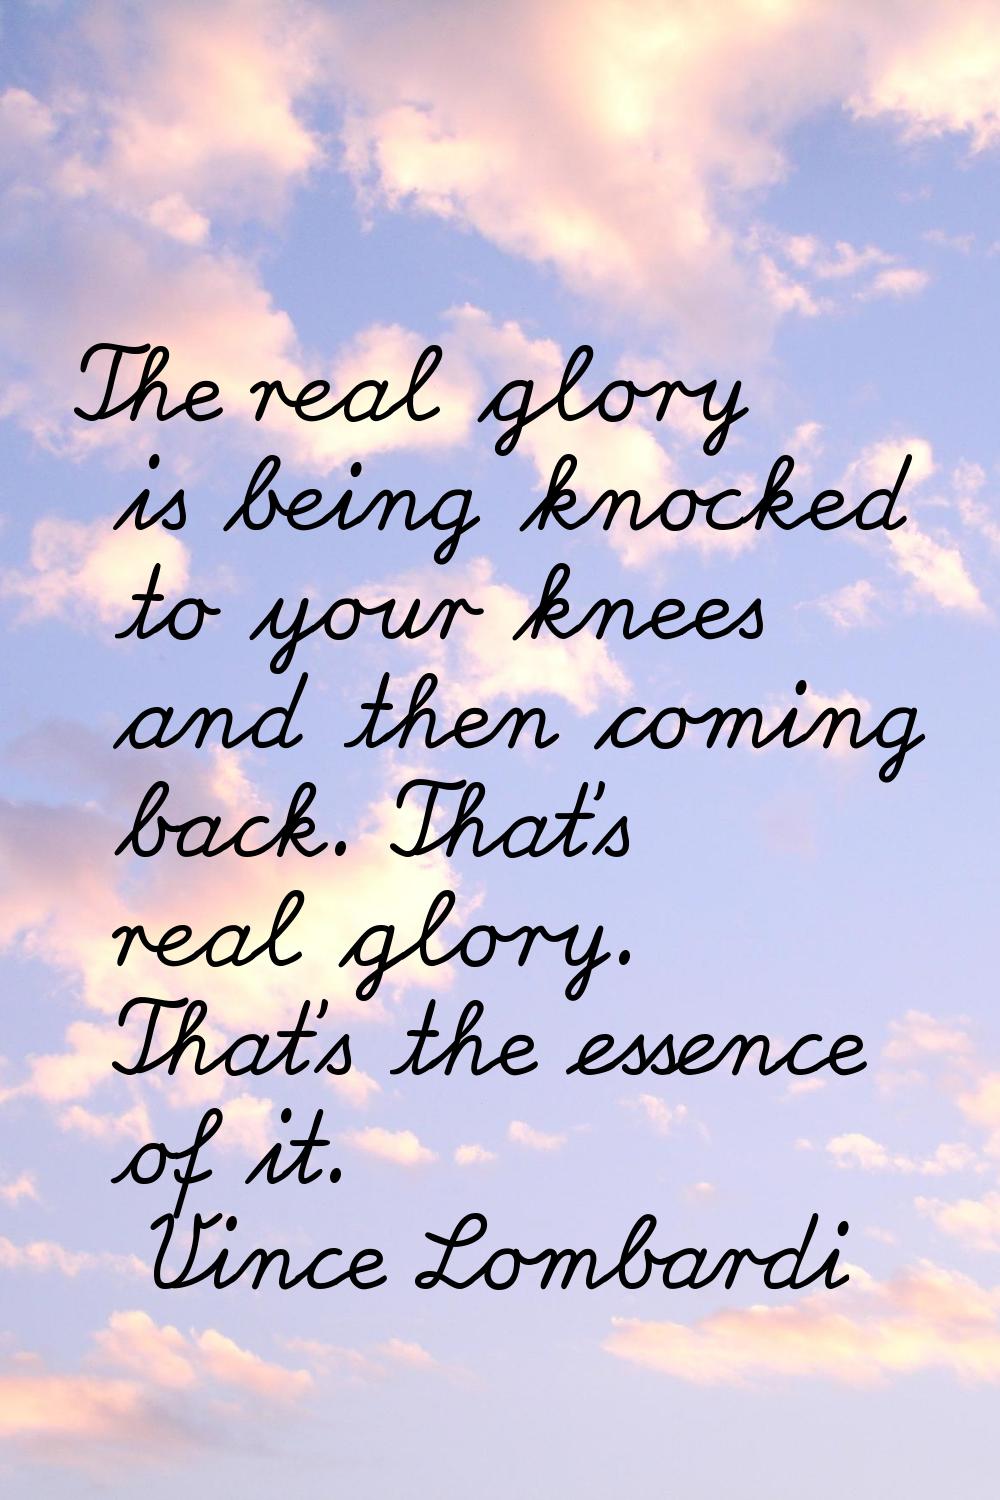 The real glory is being knocked to your knees and then coming back. That's real glory. That's the e